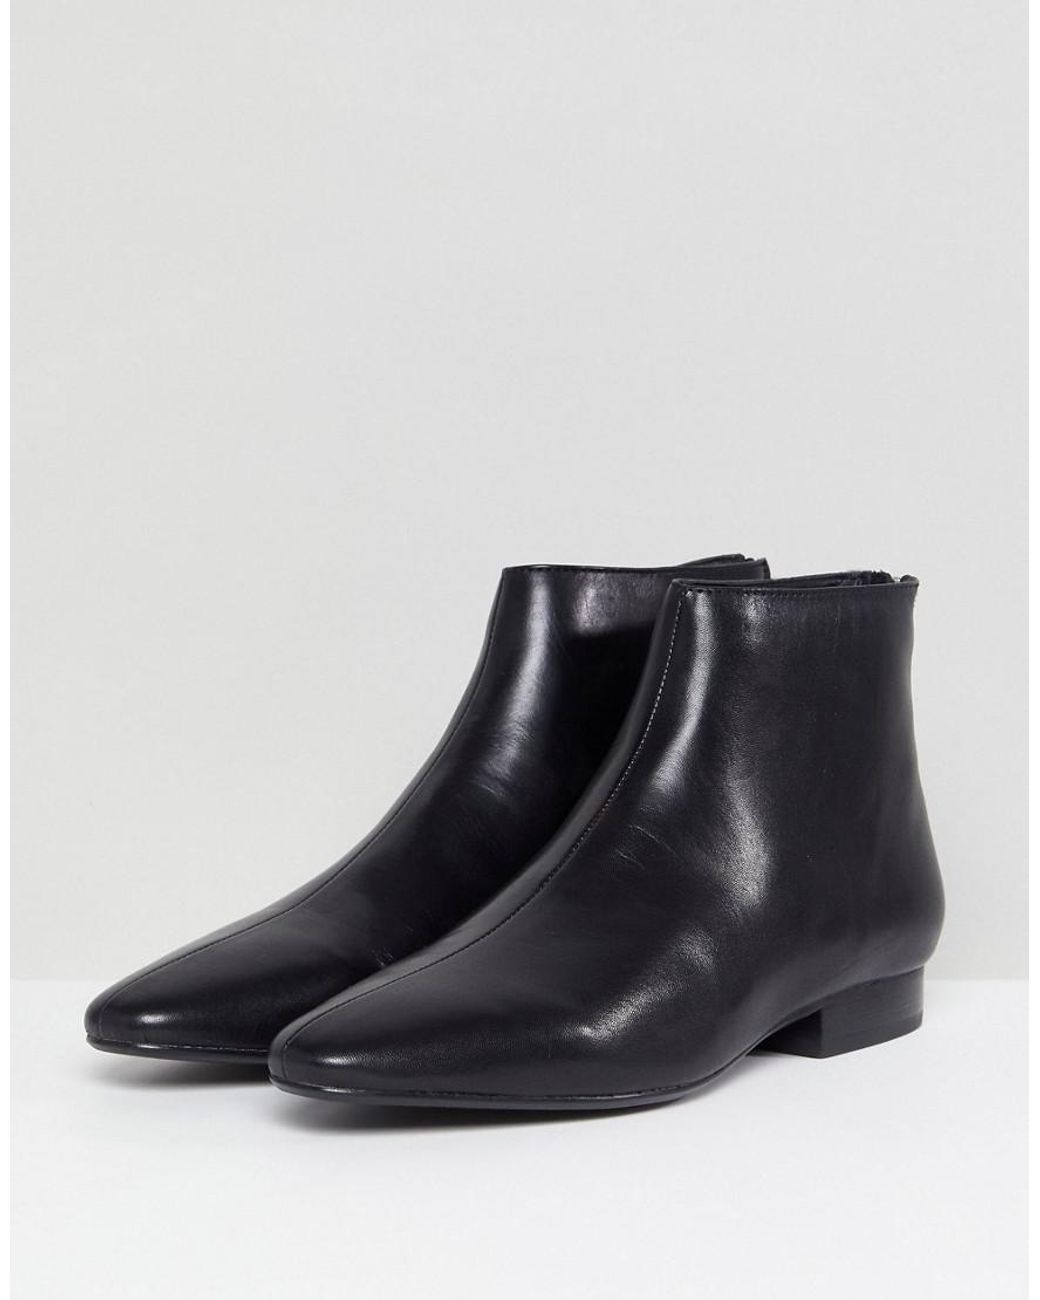 Mango Leather Flat Pointed Toe Ankle Boot in Black | Lyst